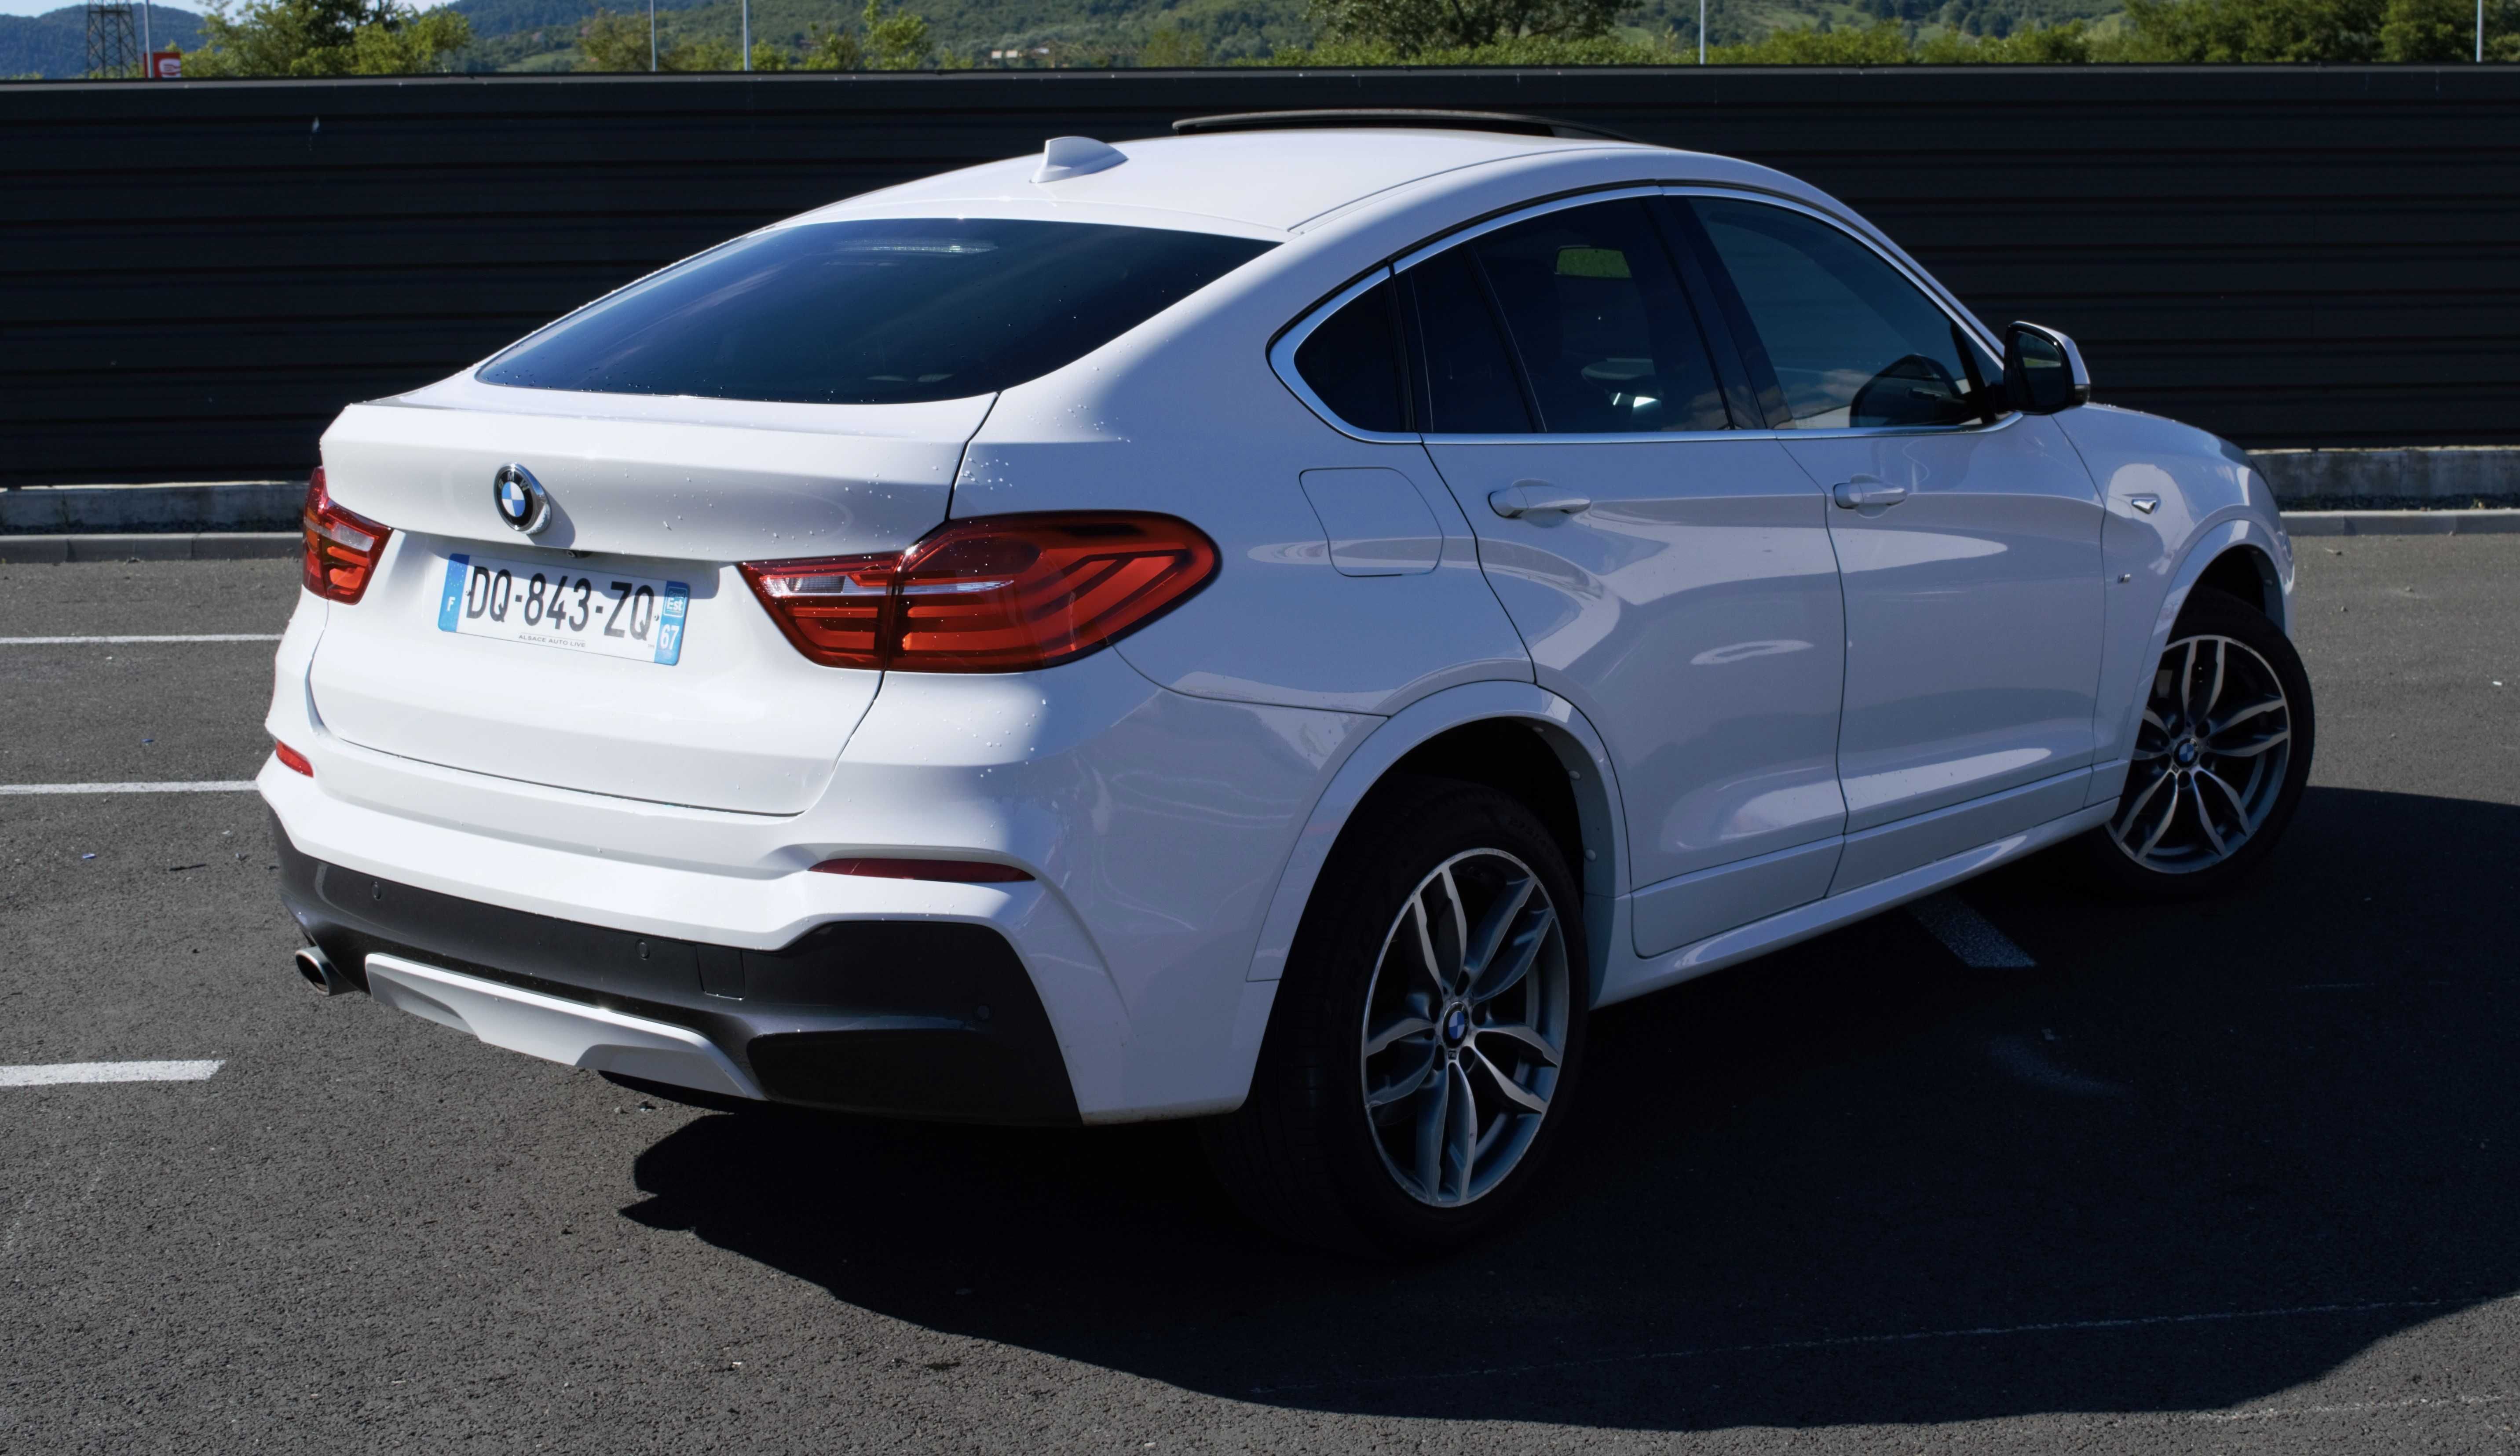 BMW X4 // M-packet // 2.0 diesel // 190 CP // Distronic // Led// Trapa